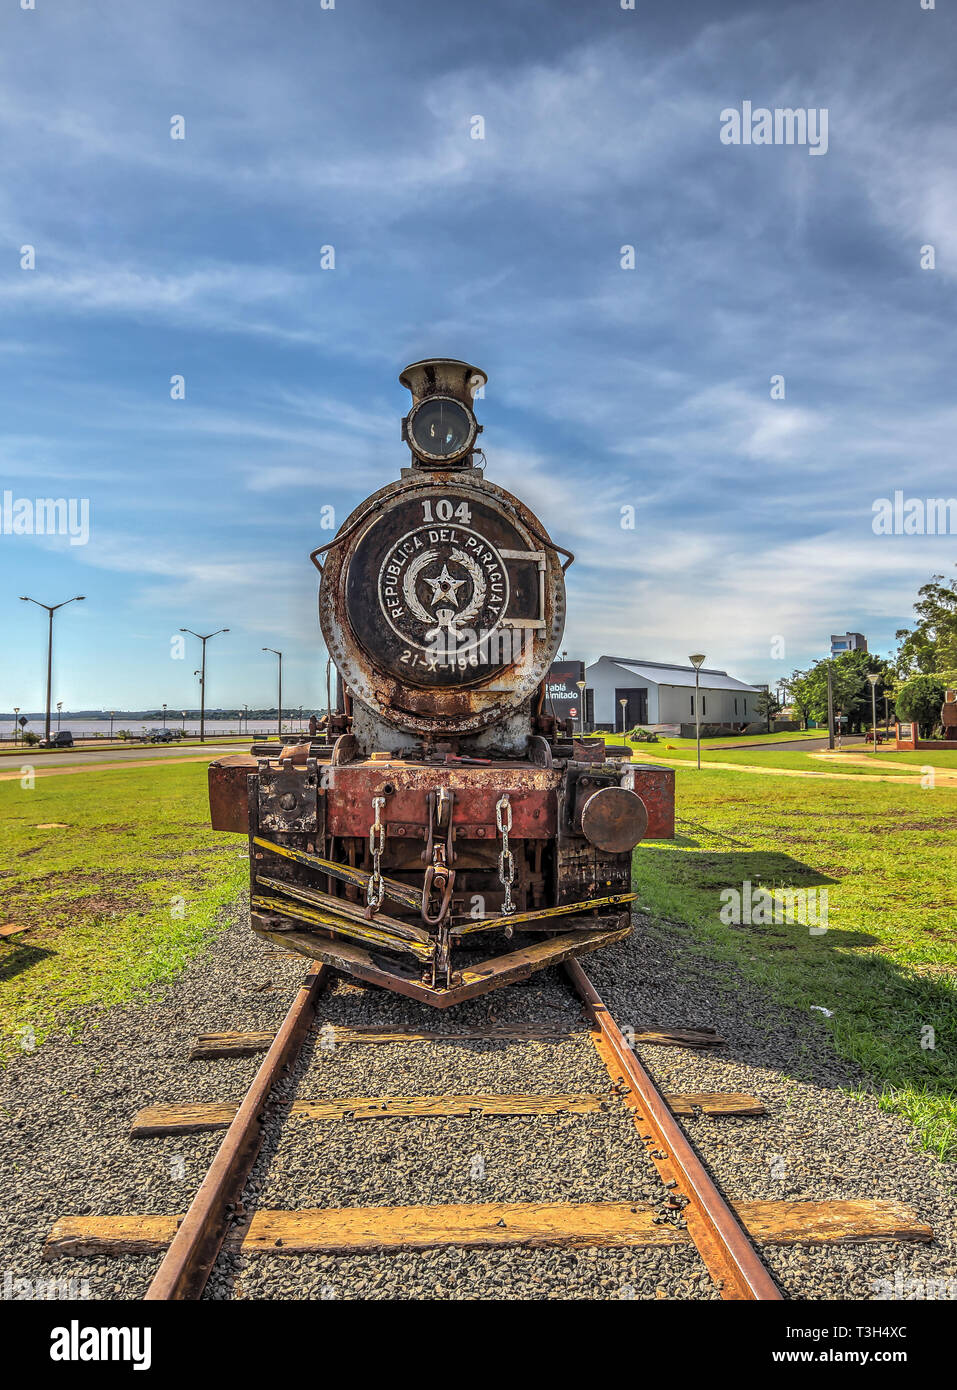 Encarnacion, Paraguay - November 14, 2018: Old rusted steam locomotive in Encarnacion. In Paraguay there is no more rail traffic today. Stock Photo